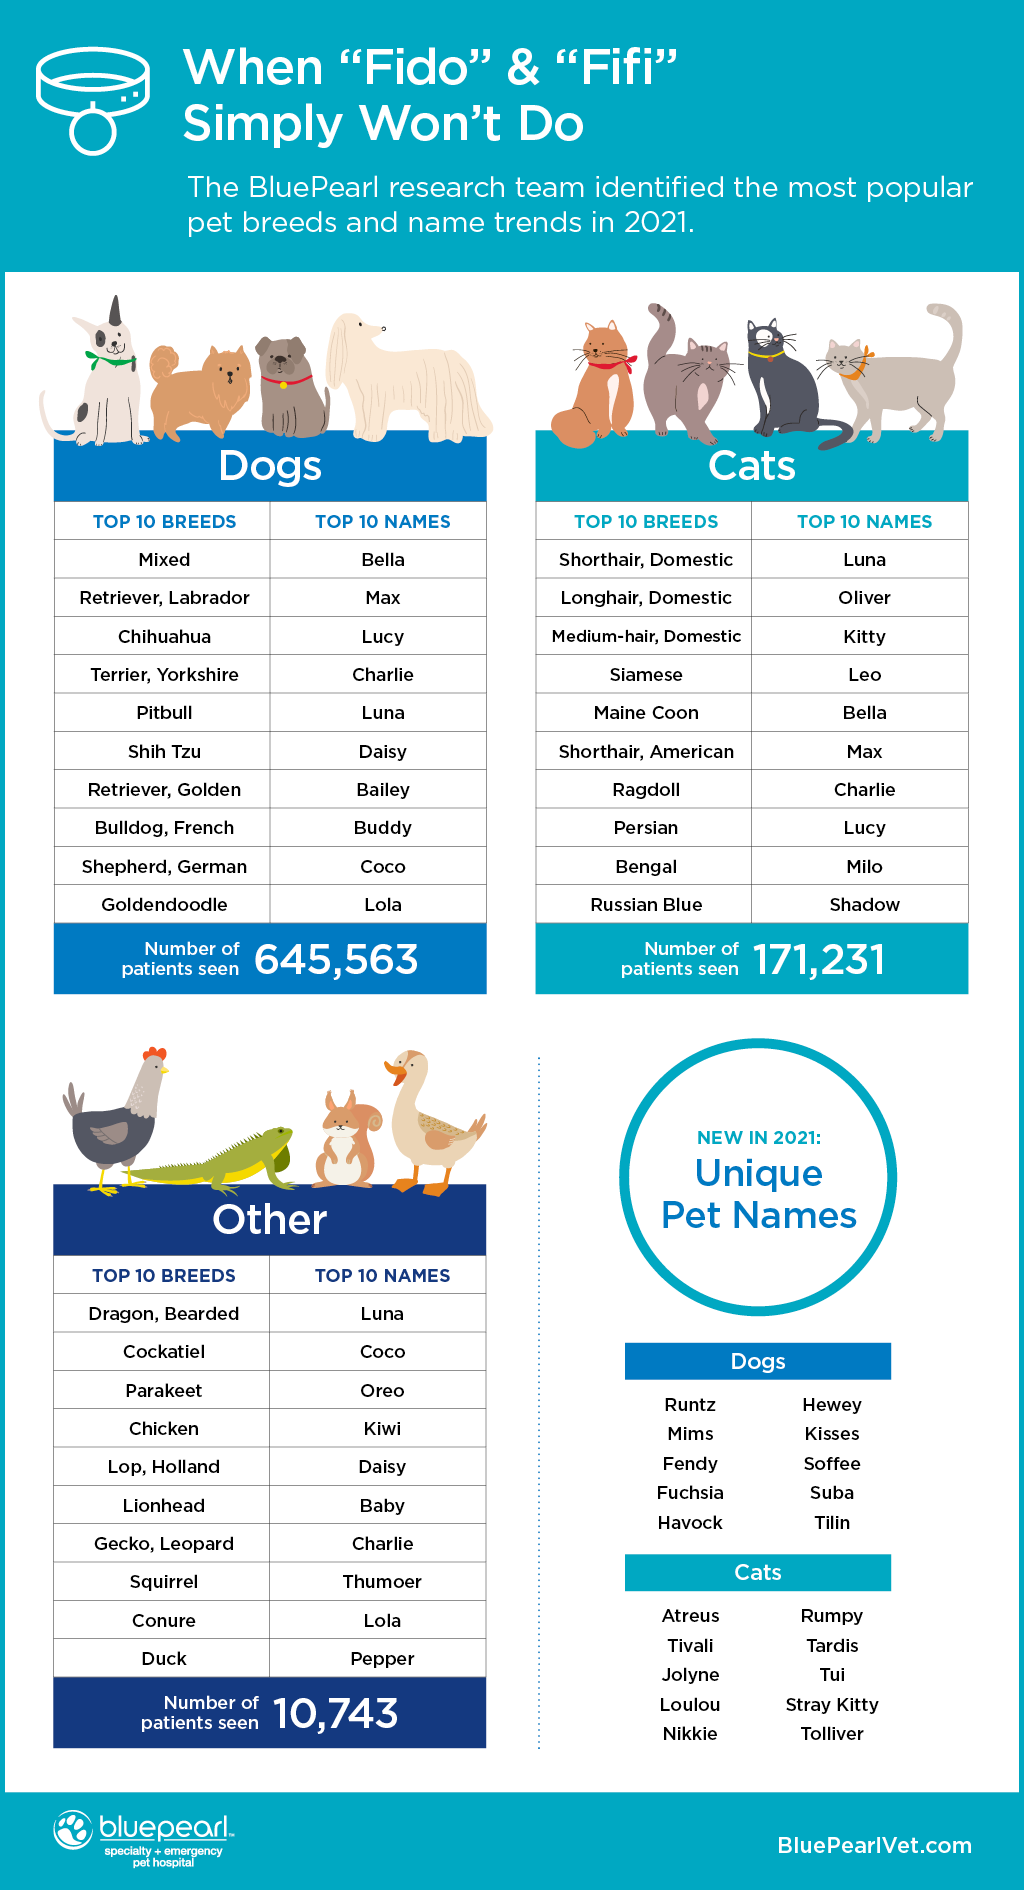 An infographic depicting the statistics behind the trendiest pet names in 2021.